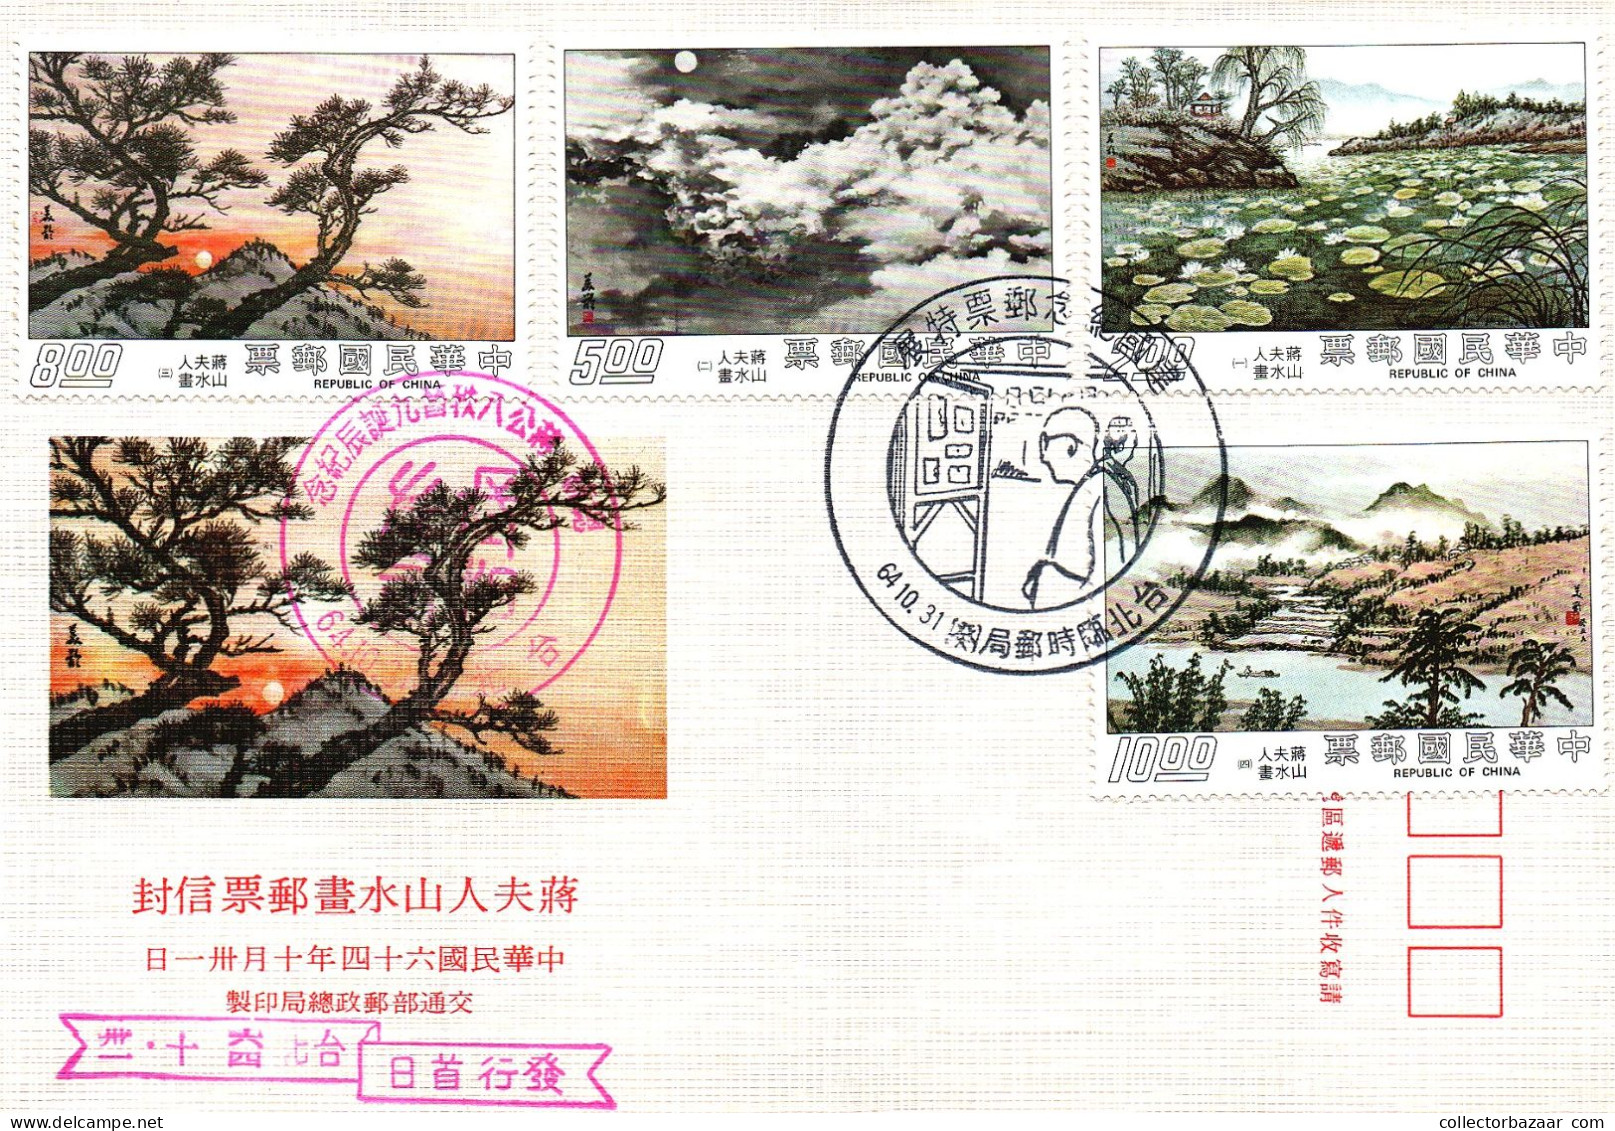 Taiwan Formosa Republic Of China FDC Art Paintings Drawings Beautiful Traditional Landscapes  - 10$,8$,5$ And 2$ Stamps - FDC